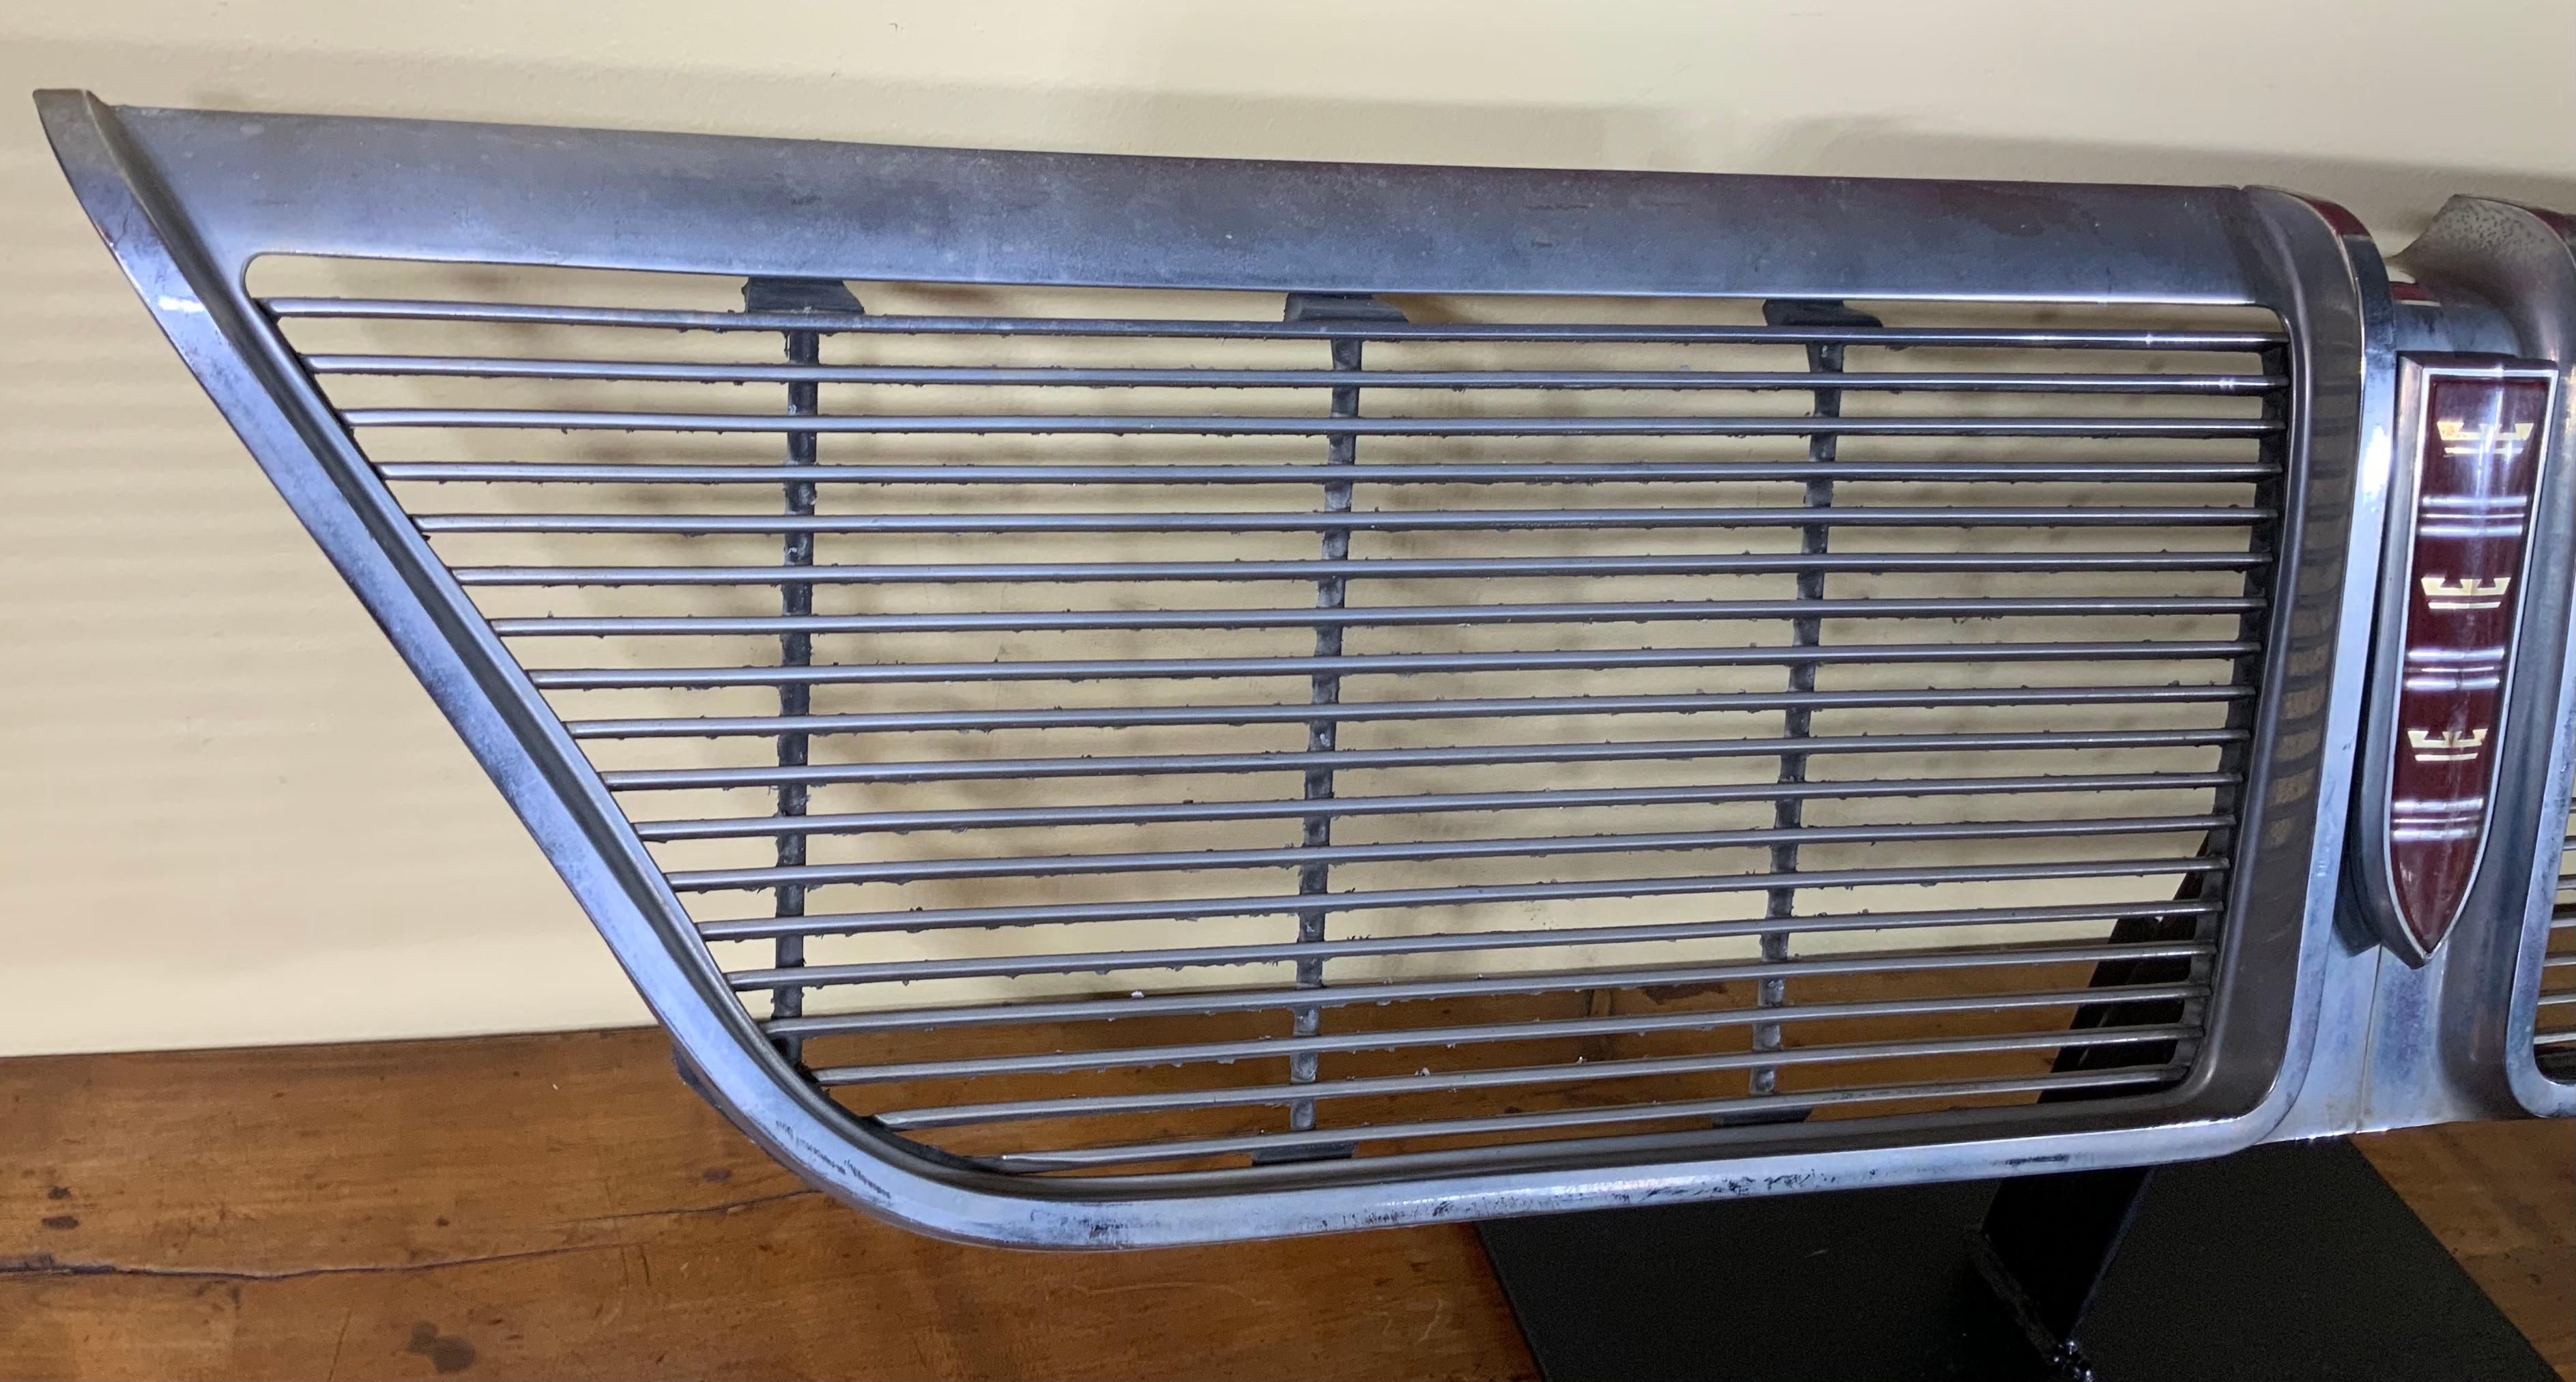 Cut Steel Original 1964 New Yorker Car Grill on Display For Sale